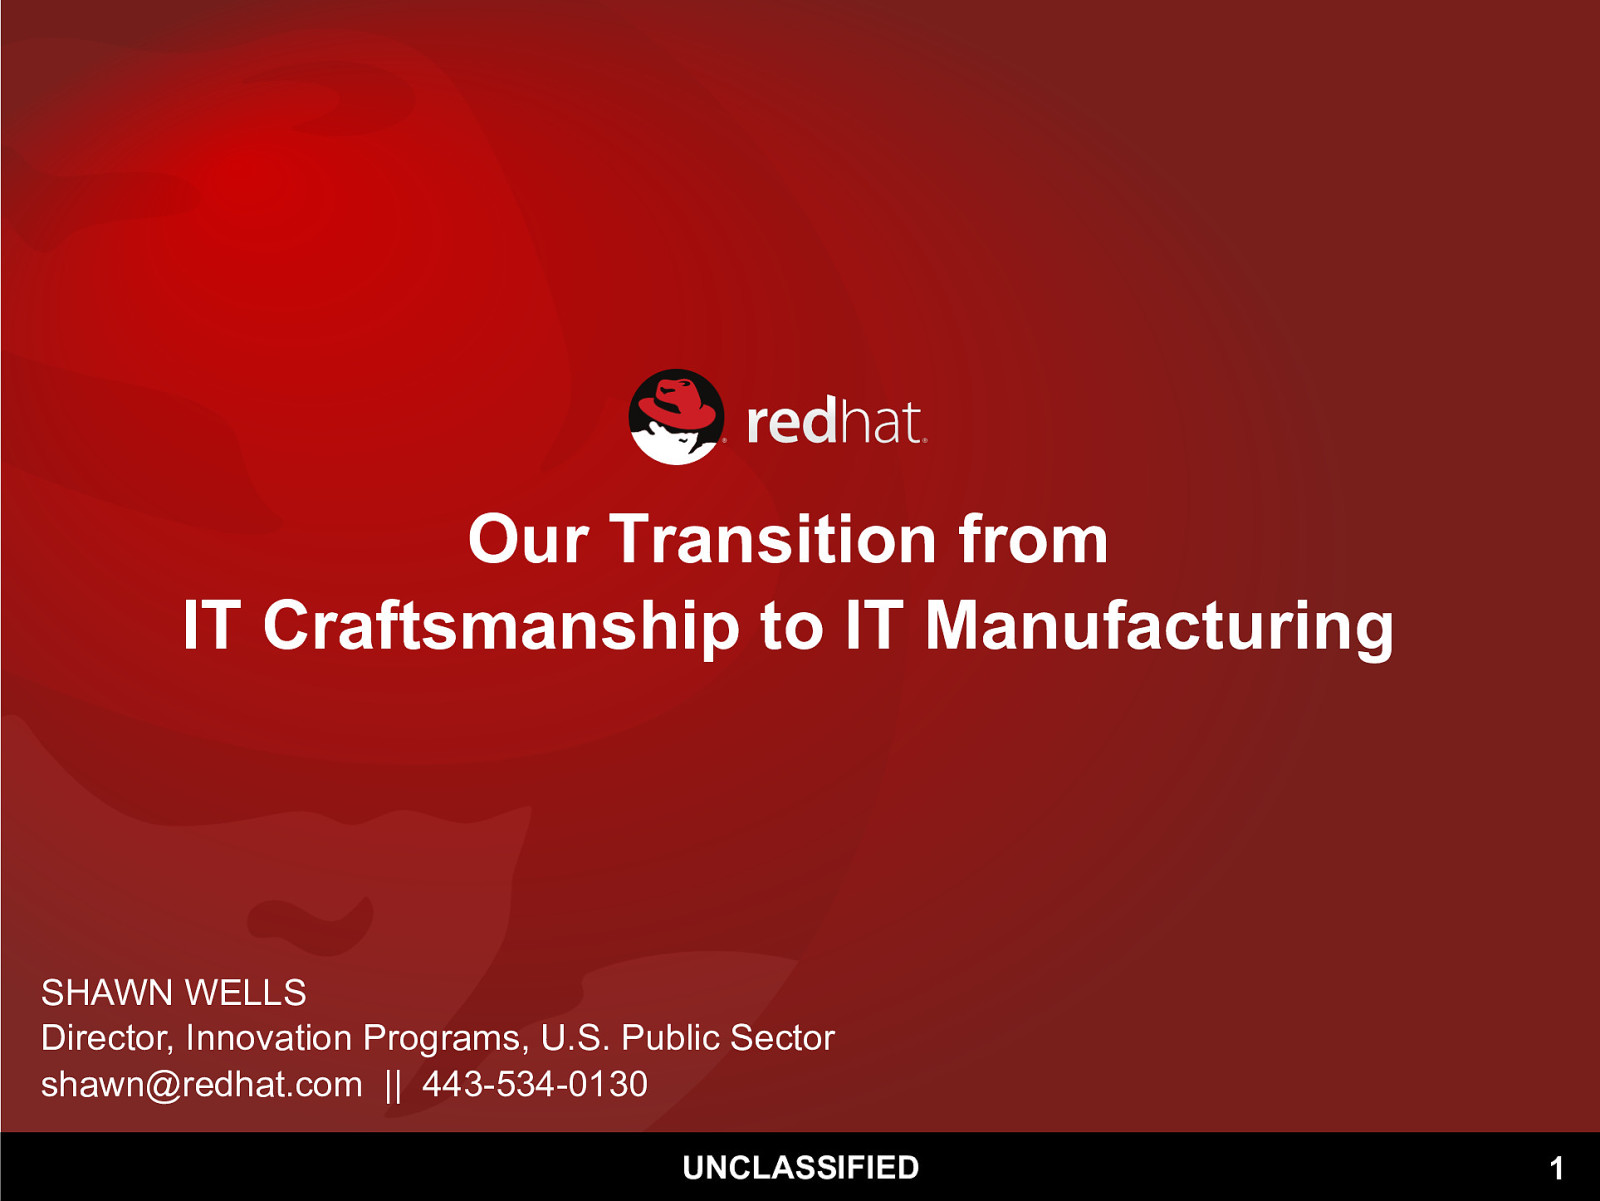 Our Transition from IT Craftsmanship to IT Manufacturing